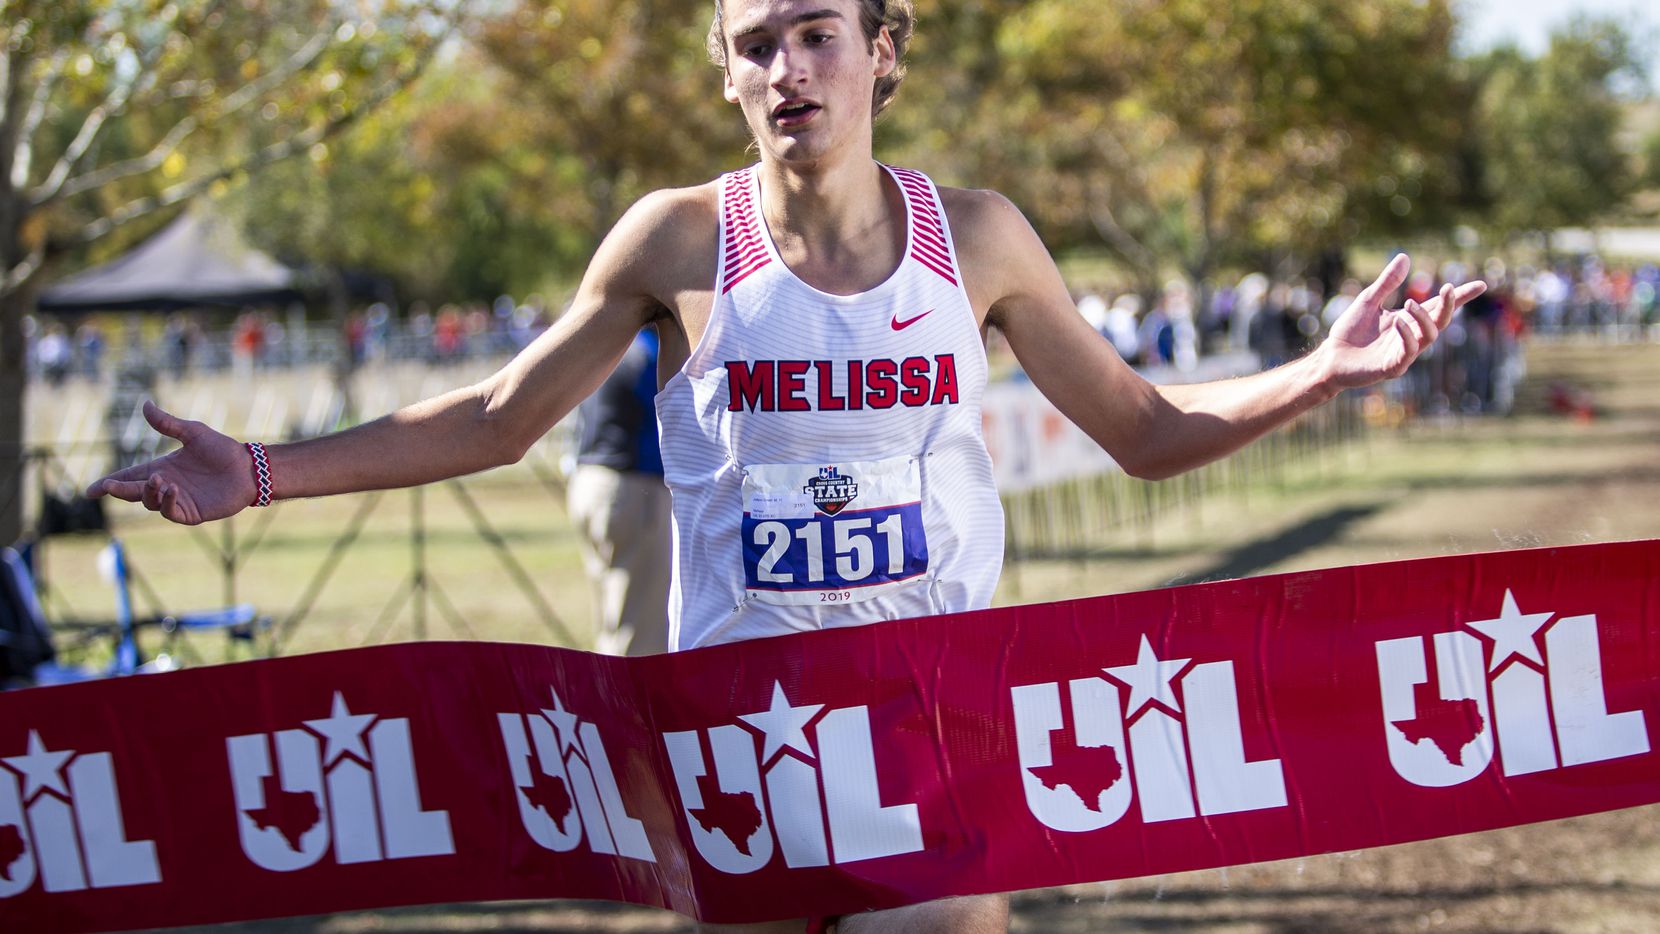 Melissa's Judson Greer wins his second straight Class 4A state title at the UIL state cross country meet Saturday at Old Settlers Park in Round Rock. (Thao Nguyen/Special Contributor)